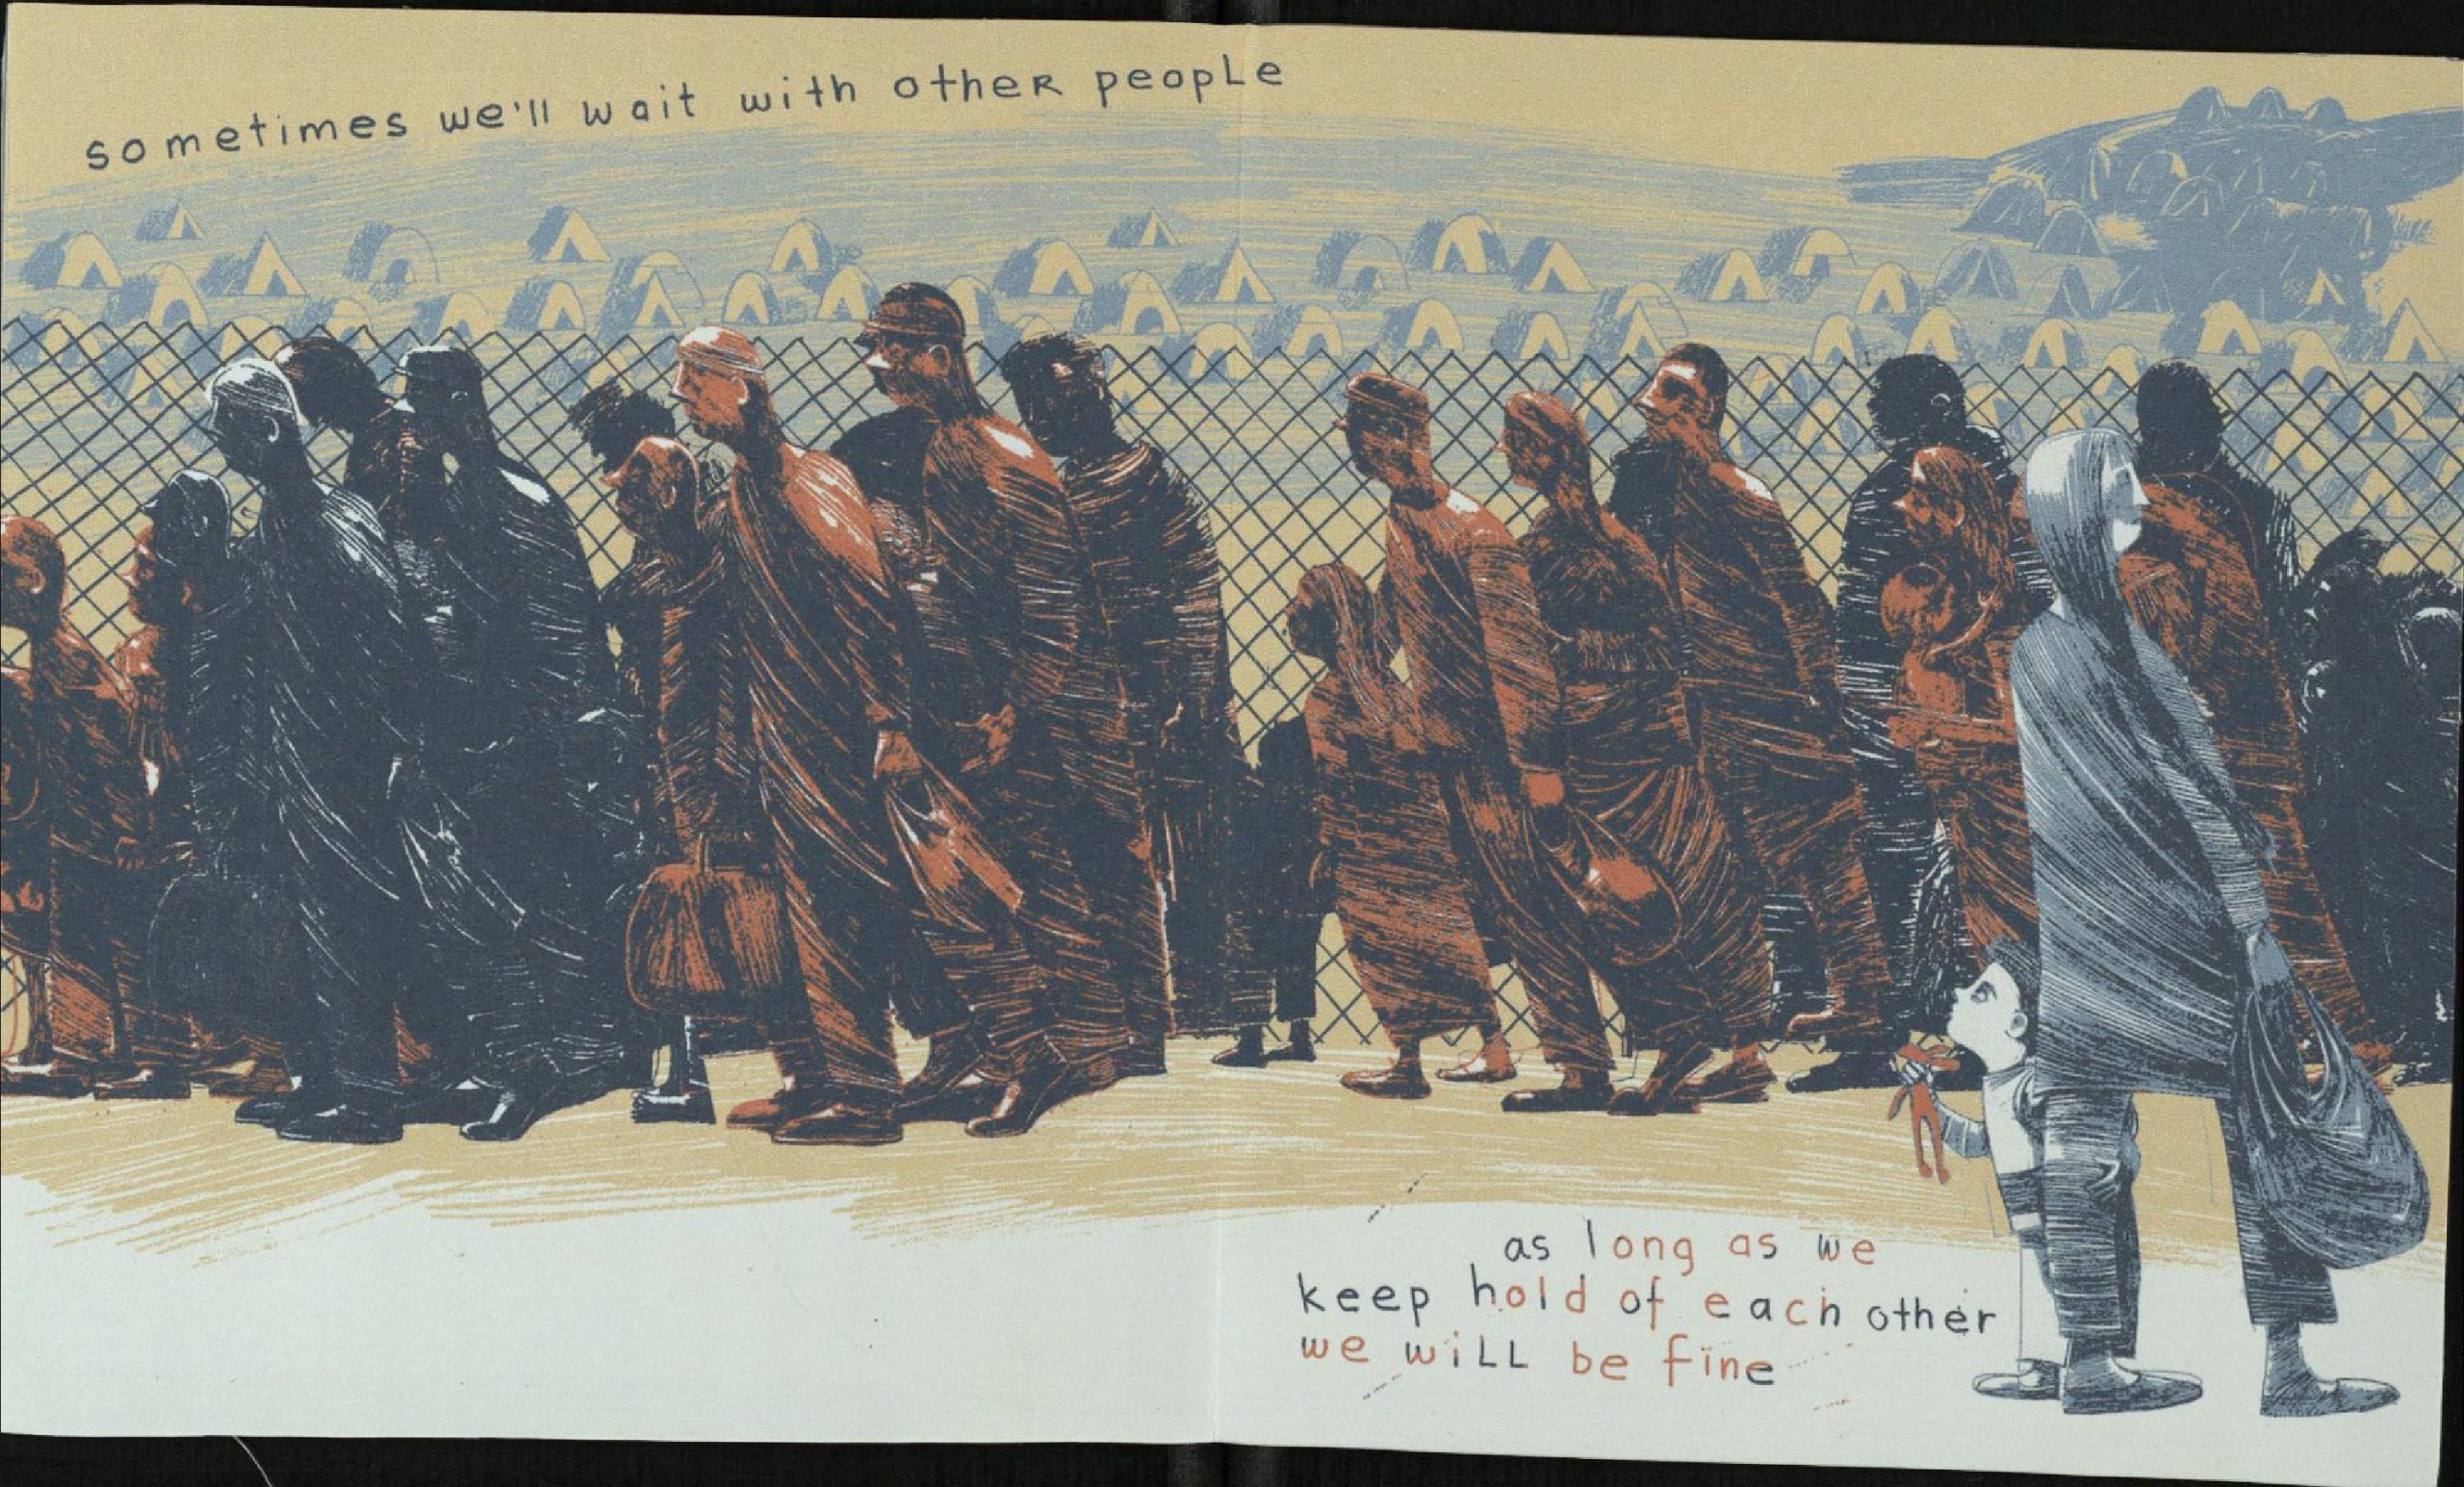 Dummy book spread for My Name is Not Refugee showing revised composition for crowd of people in front of metal fencing